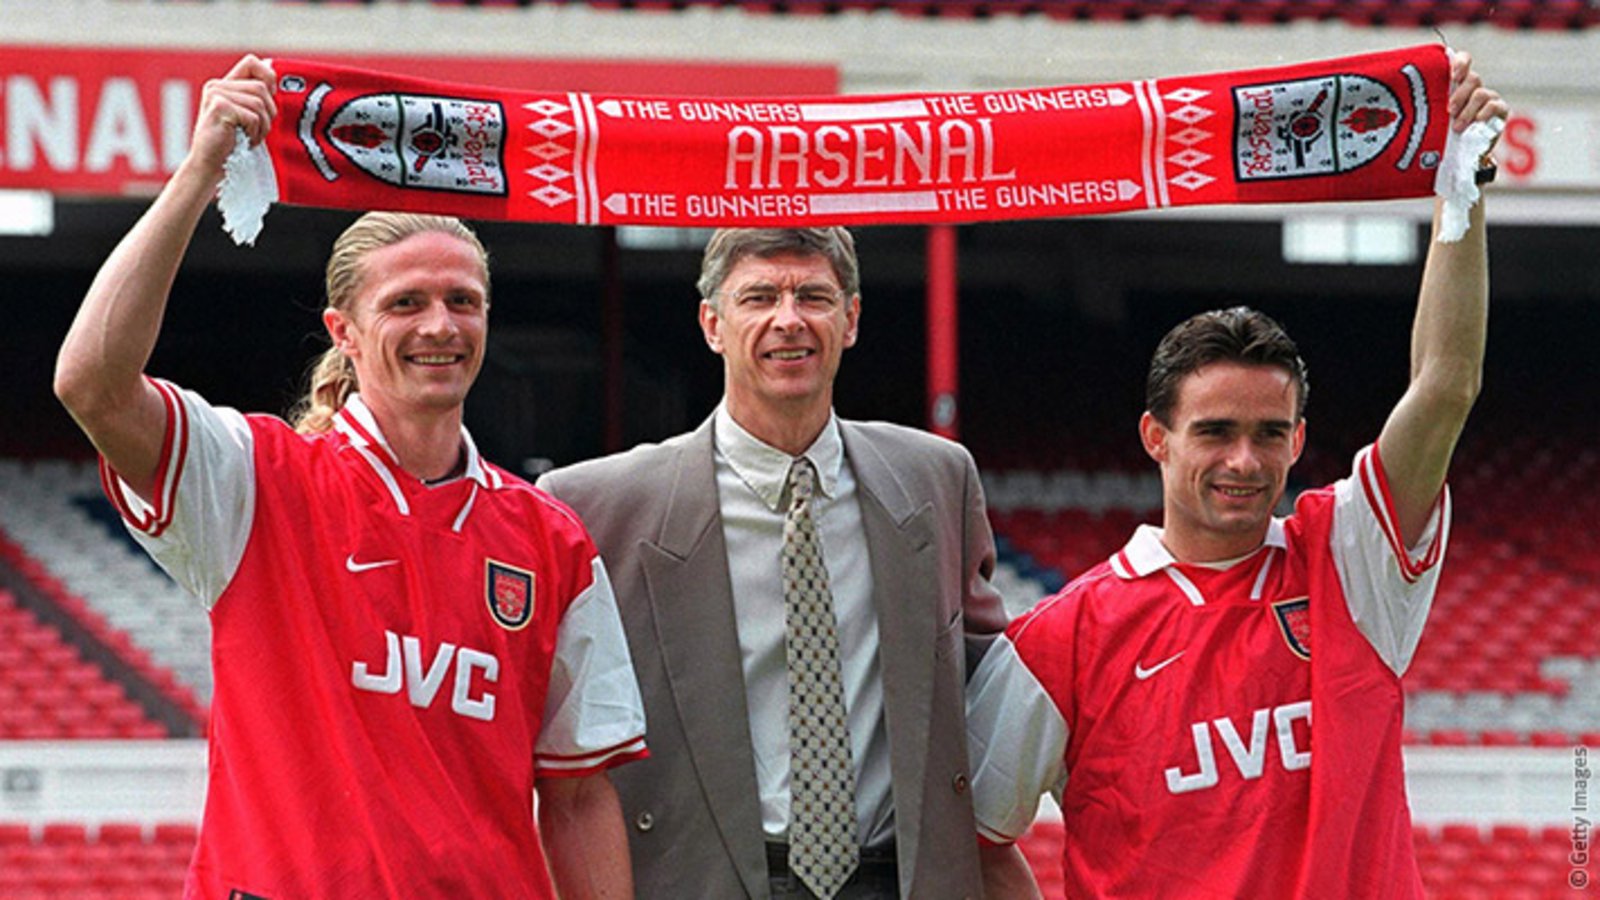 Wenger - Why I went with instinct to sign Overmars | News | Arsenal.com